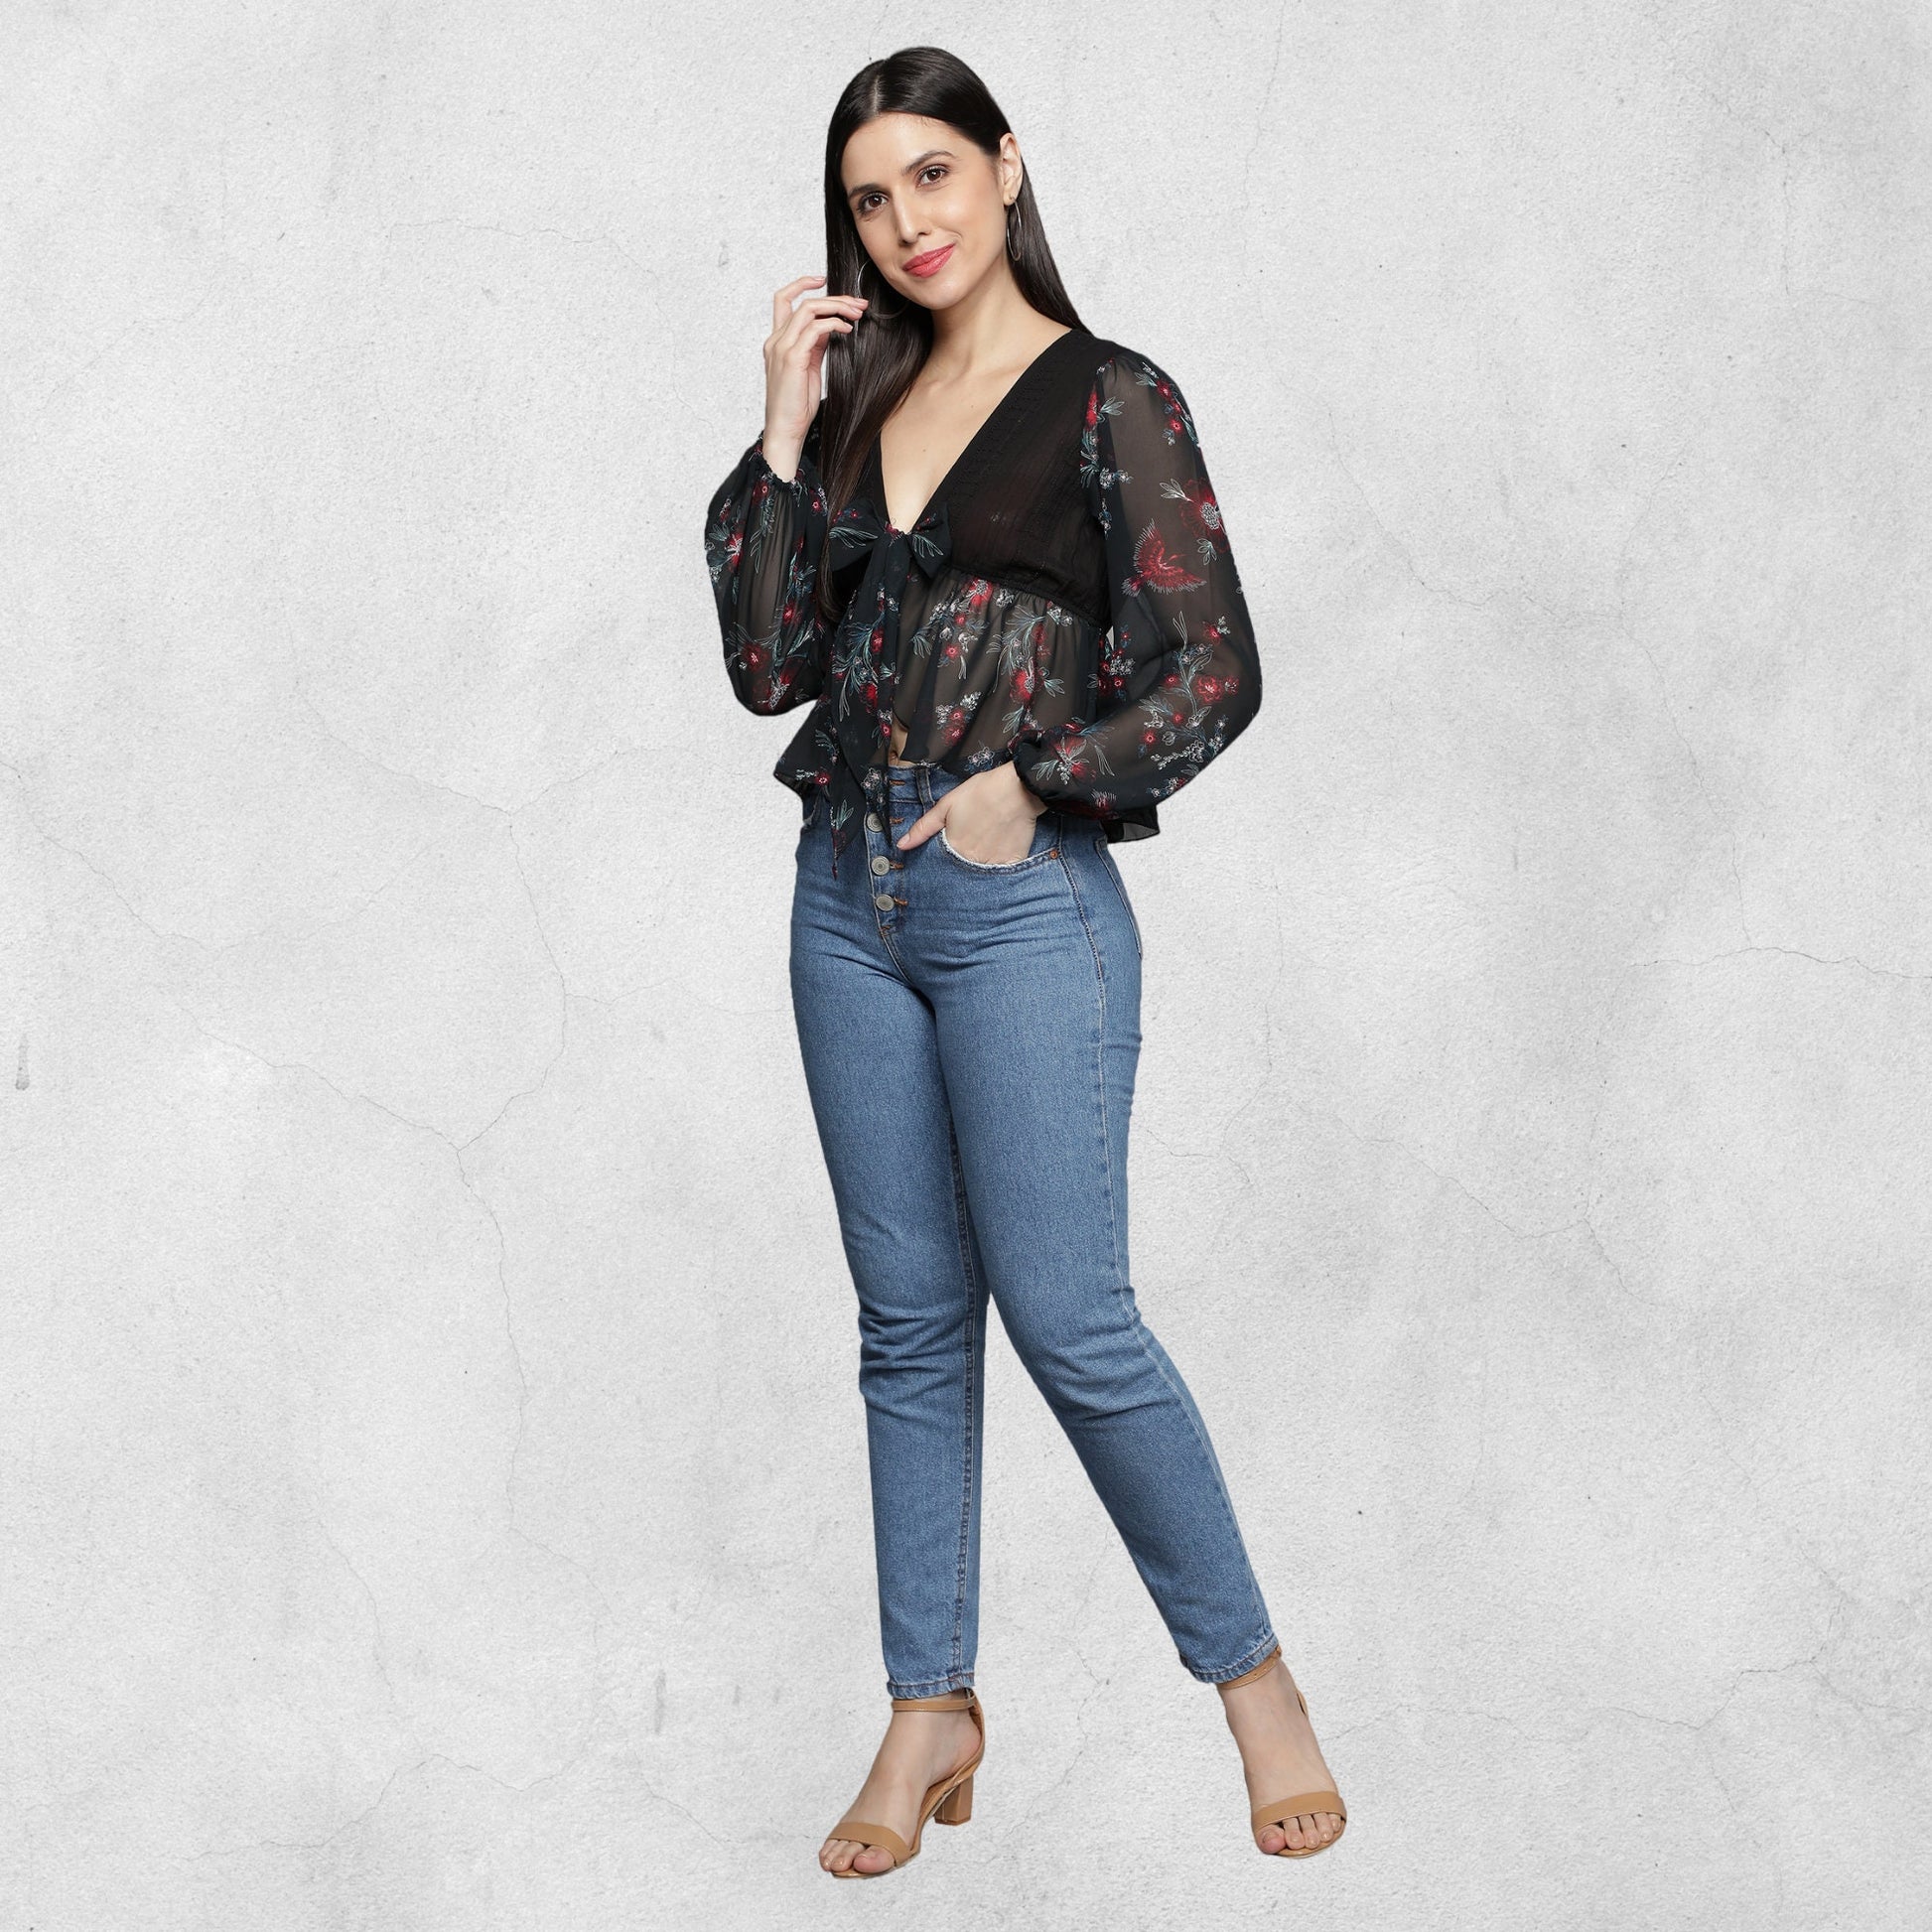 Women's_Black_Top  Top_for_Women  Sexy_Top  Romantic_Top  must_have  Long_Sleeves_Blouse  Long_Sleeves_Black  Georgette_Blouse  for_her_top  Floral_Printed_Top  Bow_tie_top  Black_Top  Black_Printed_Top